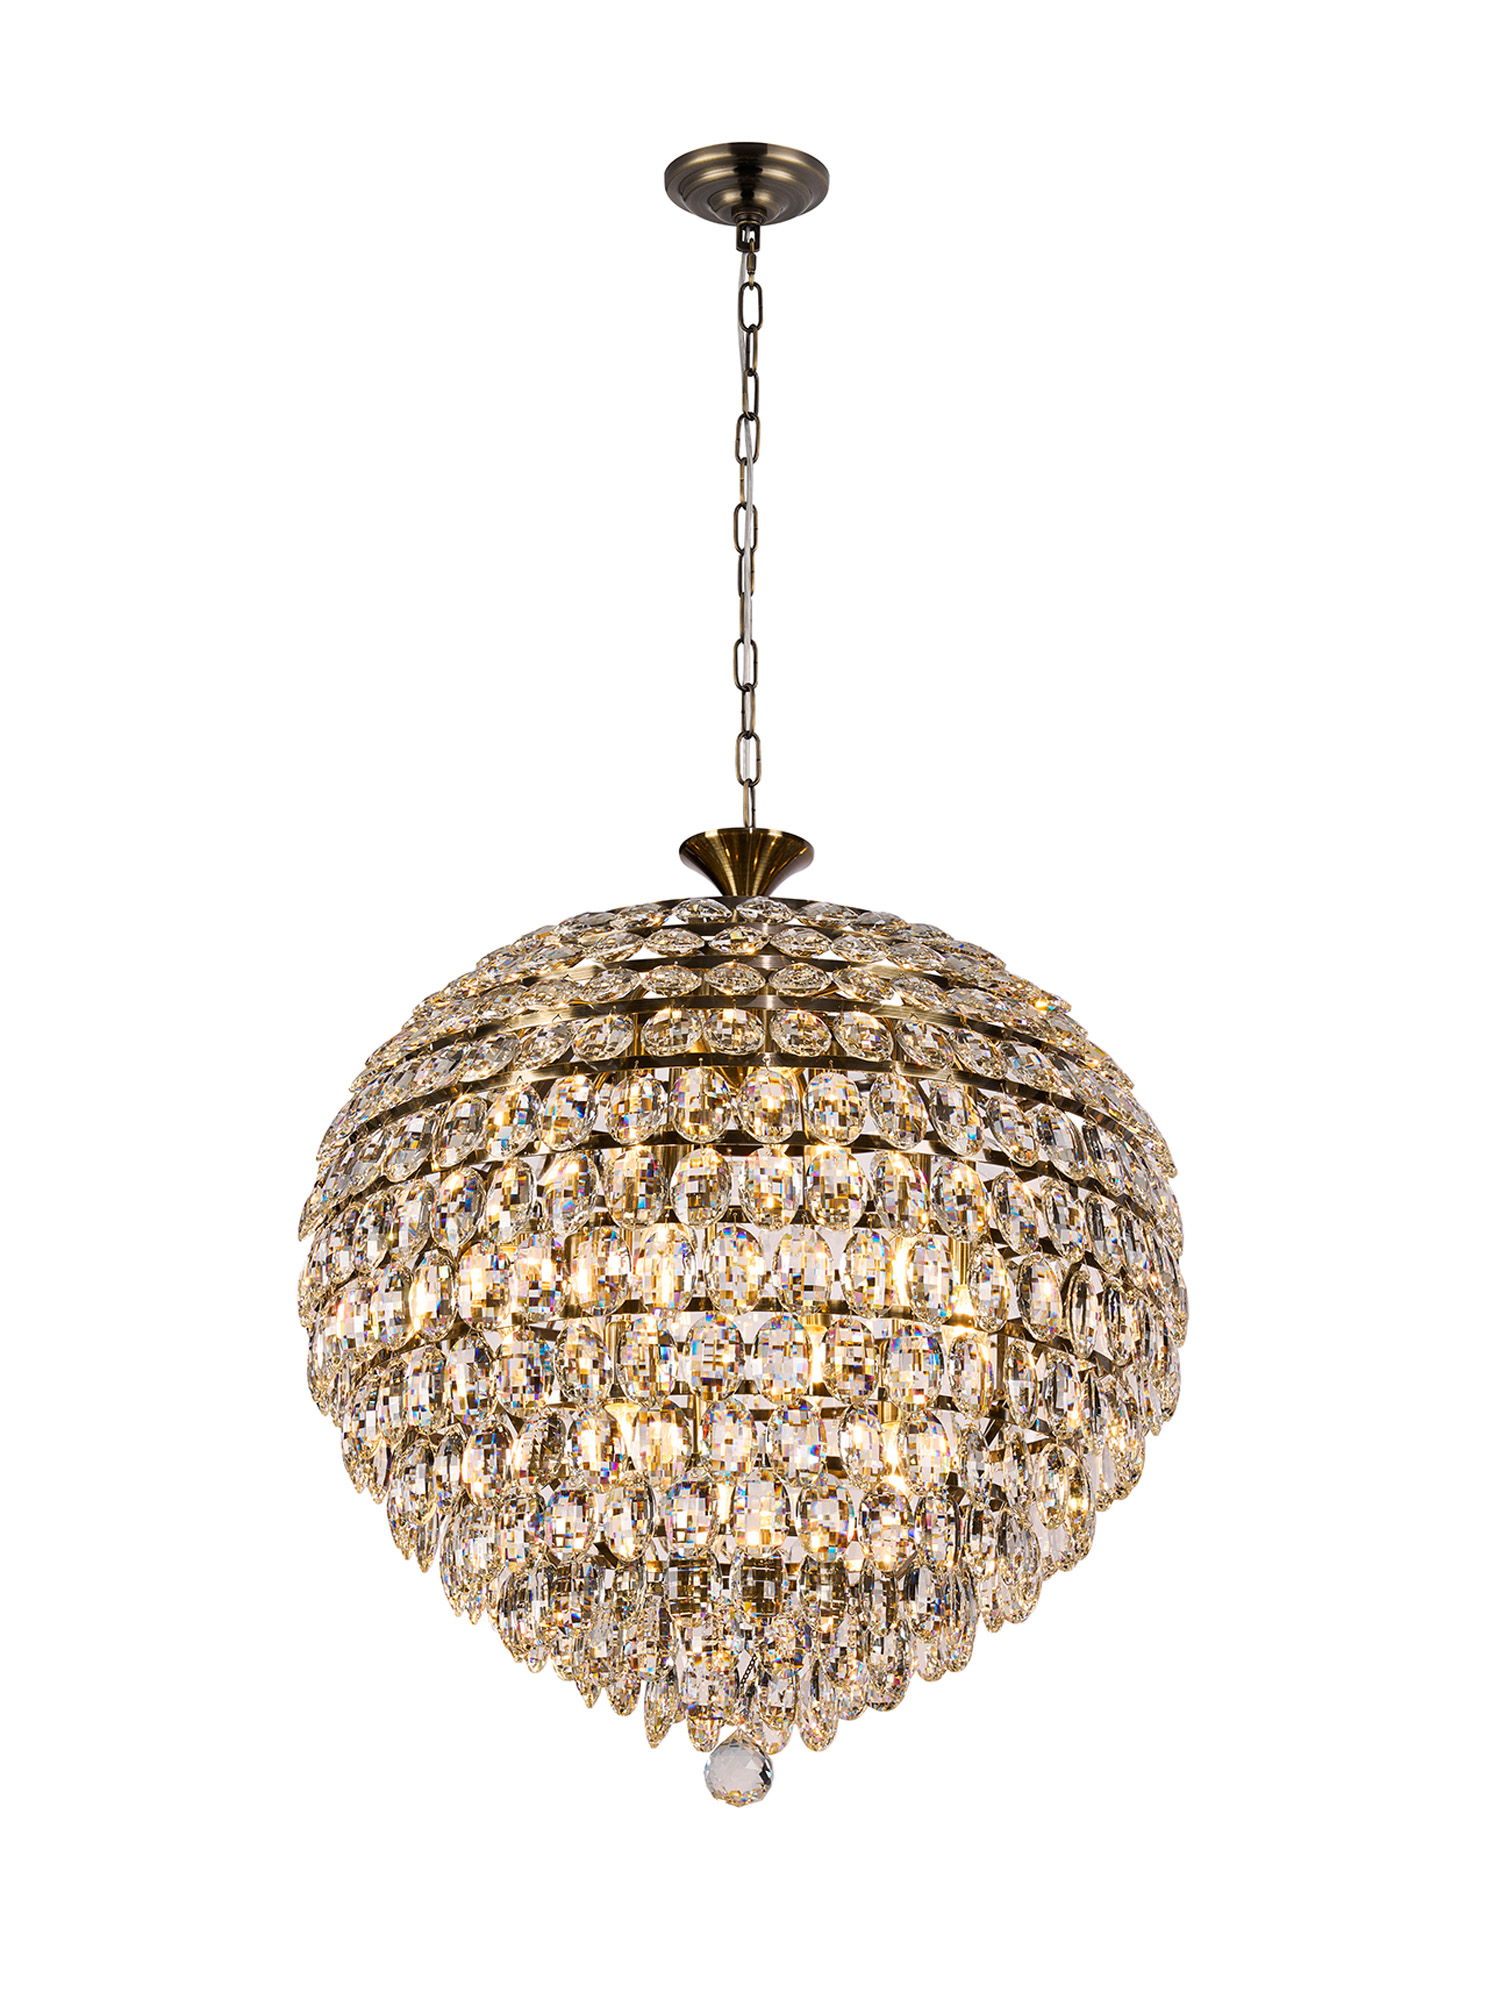 Coniston Antique Brass Crystal Ceiling Lights Diyas Spherical Crystal Fittings